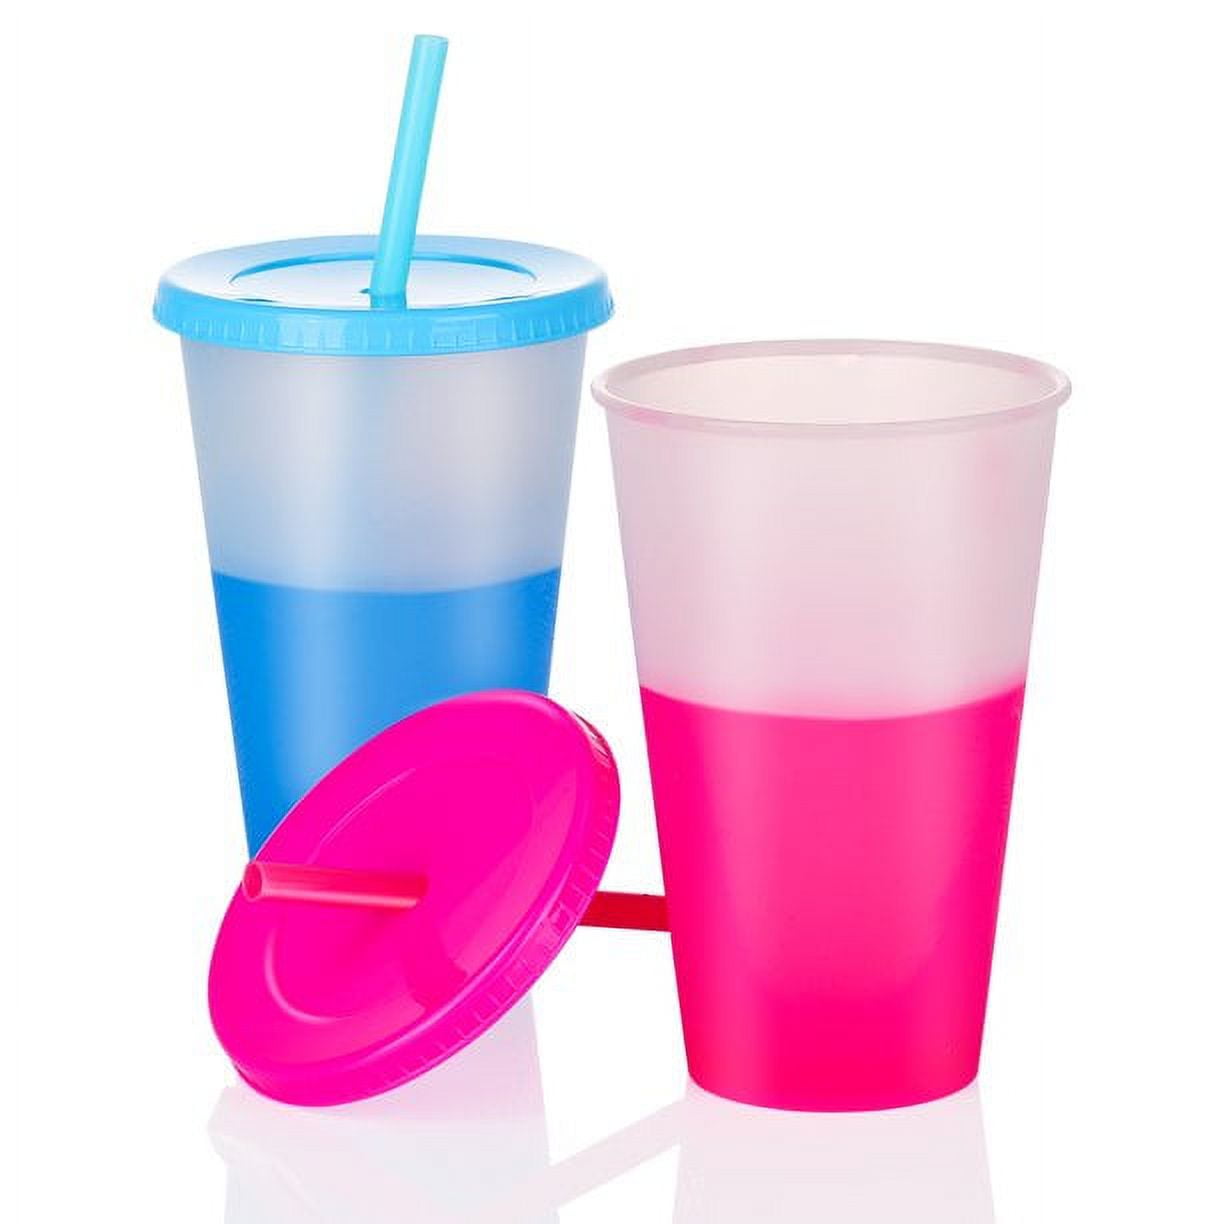 Stainless Steel Cups with Lids and Straws, 12 Oz Drinking Tumbler with  Silicone Sleeves for Kids/Adu…See more Stainless Steel Cups with Lids and